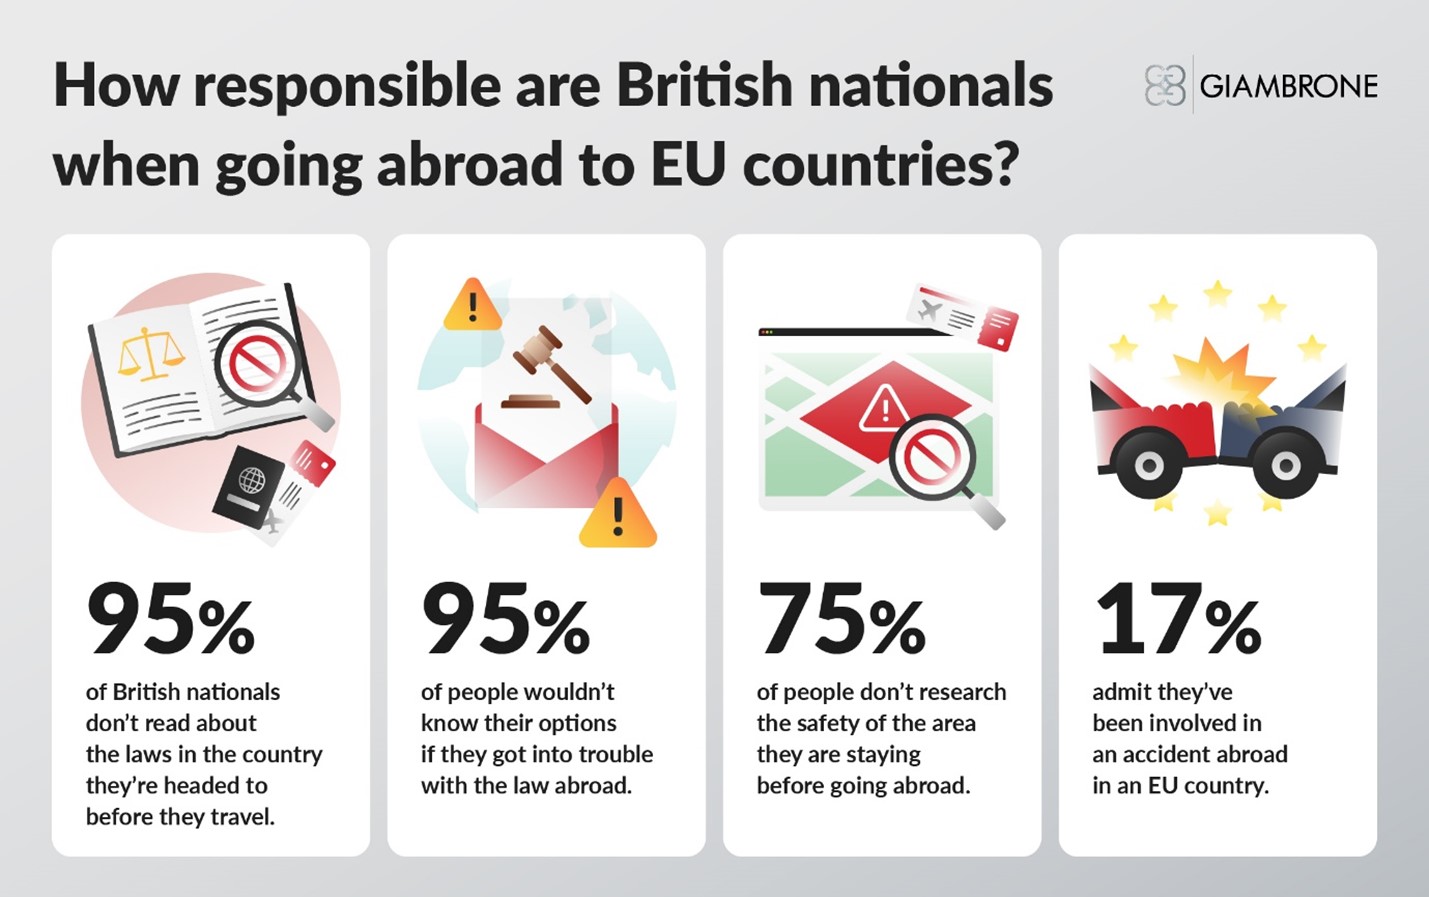 Graph showing how responsible british nationals are when they are abroad. The image depicts that 95% of british nationals dont read the laws of the foreign country they are visiting and also do not know the options if they go into trouble. 75% dont research the safety of the area they are going.